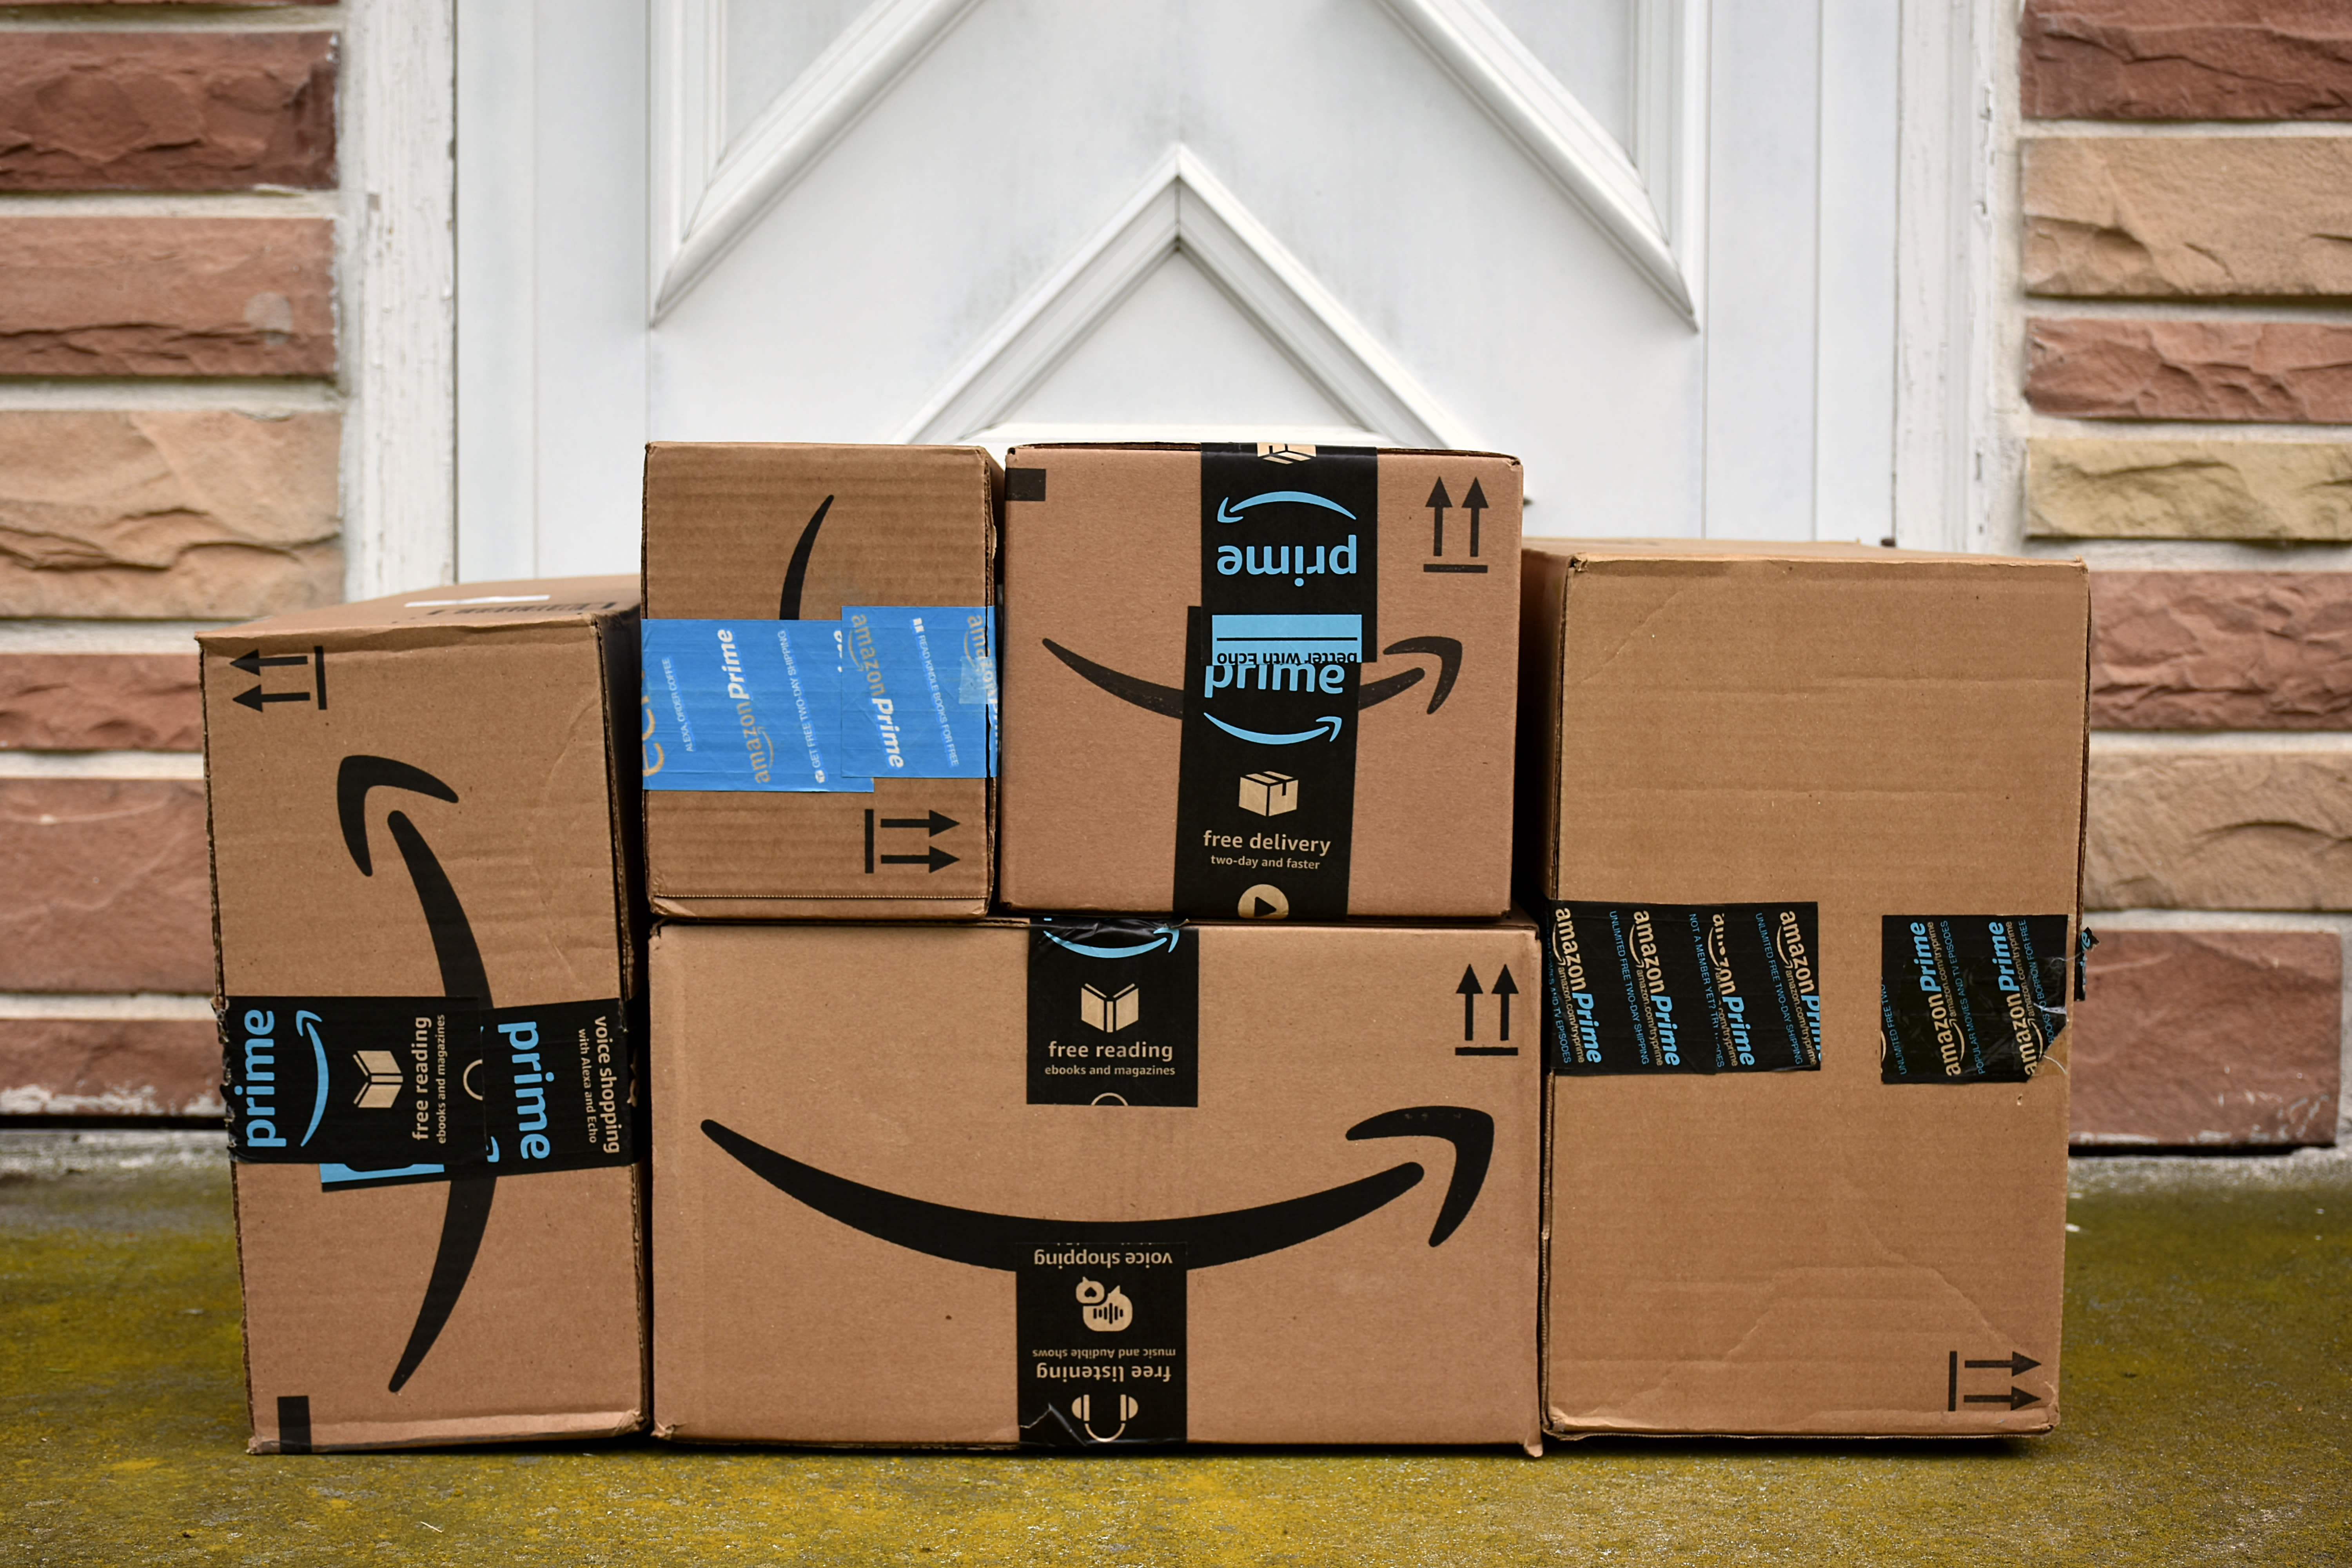 Prime expands to offer one-day shipping on more items